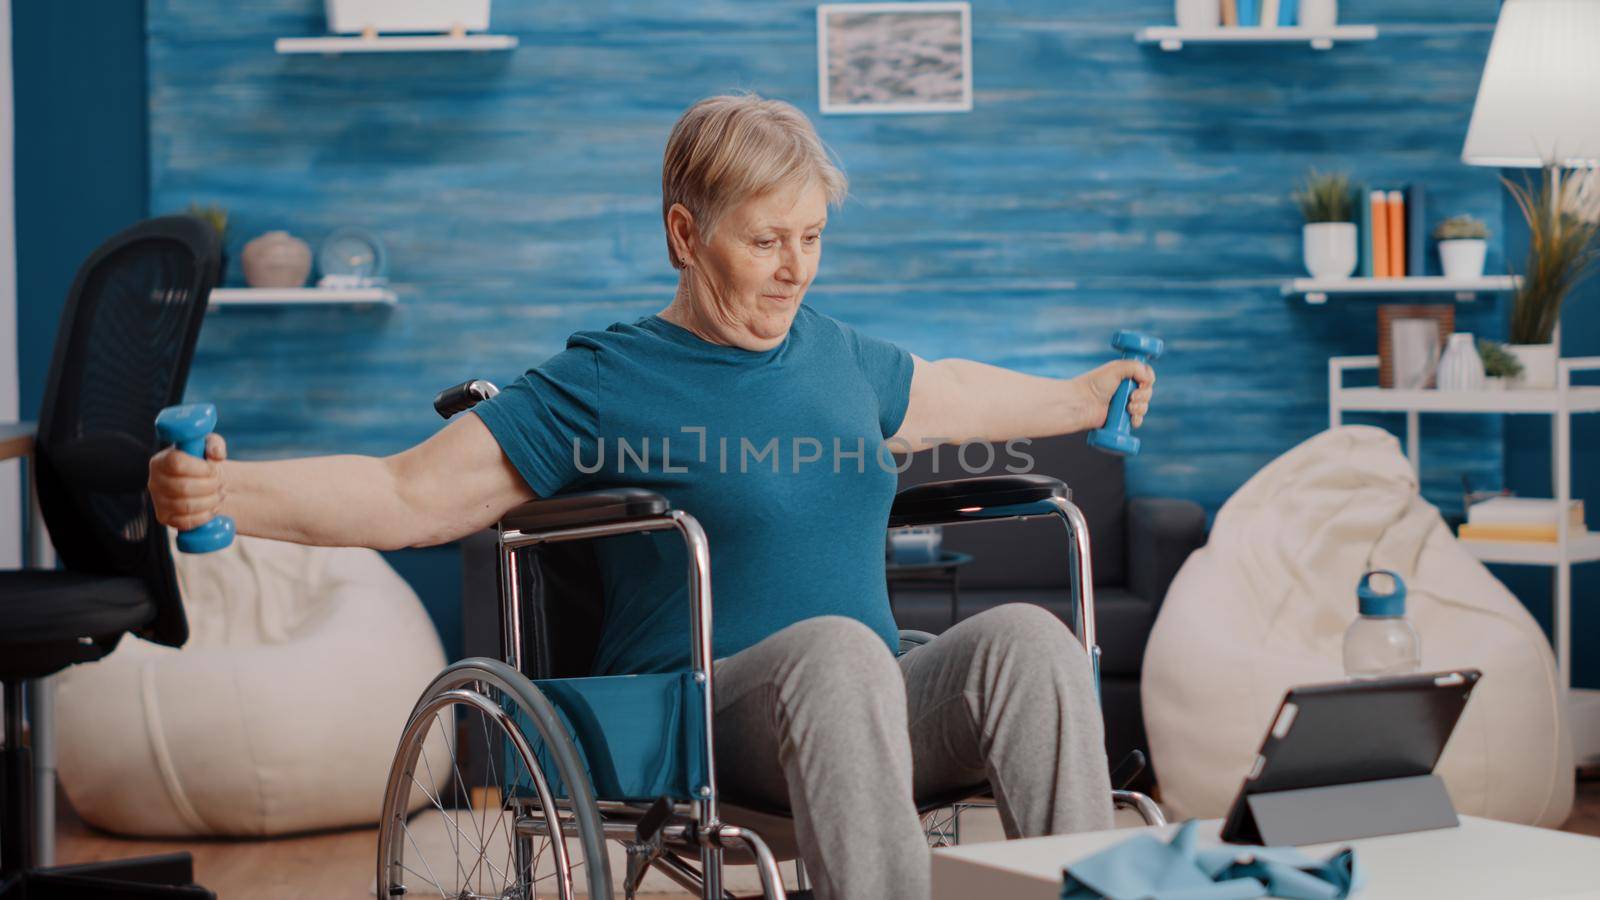 Senior adult sitting in wheelchair and doing exercise with weights while following training video on tablet. Elder woman with disability using dumbbells to train with online lesson.